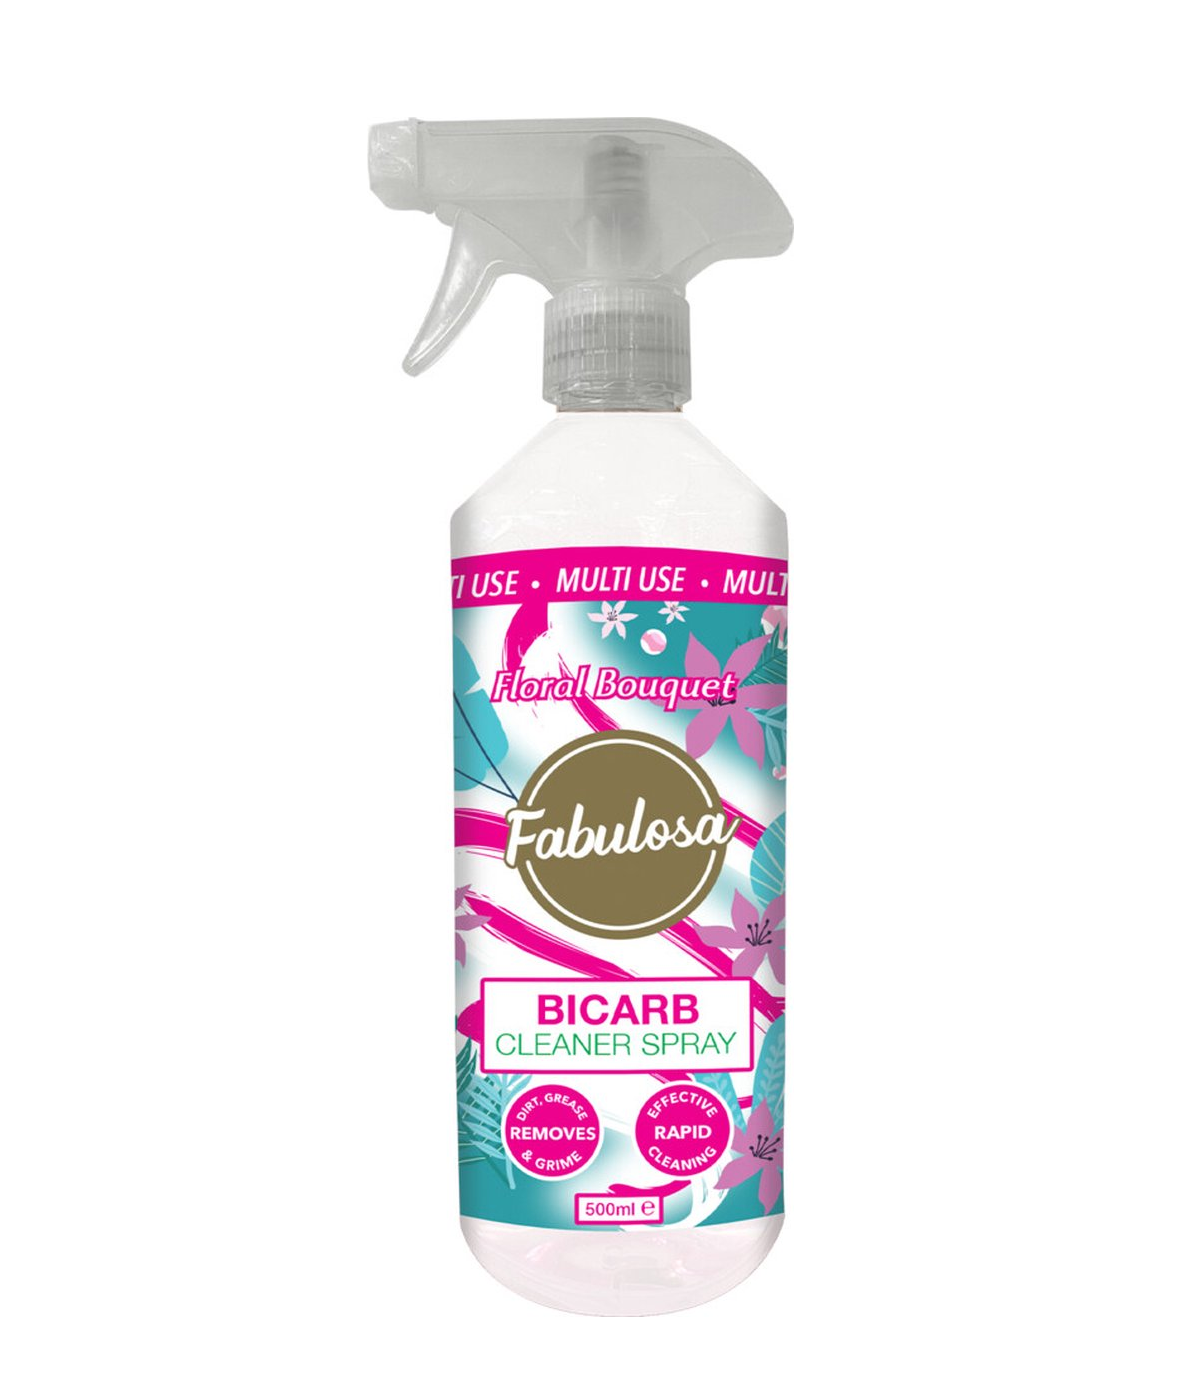 Fabulosa Cleaning Spray Floral Bouquet with sodium bicarbonate - 500ml